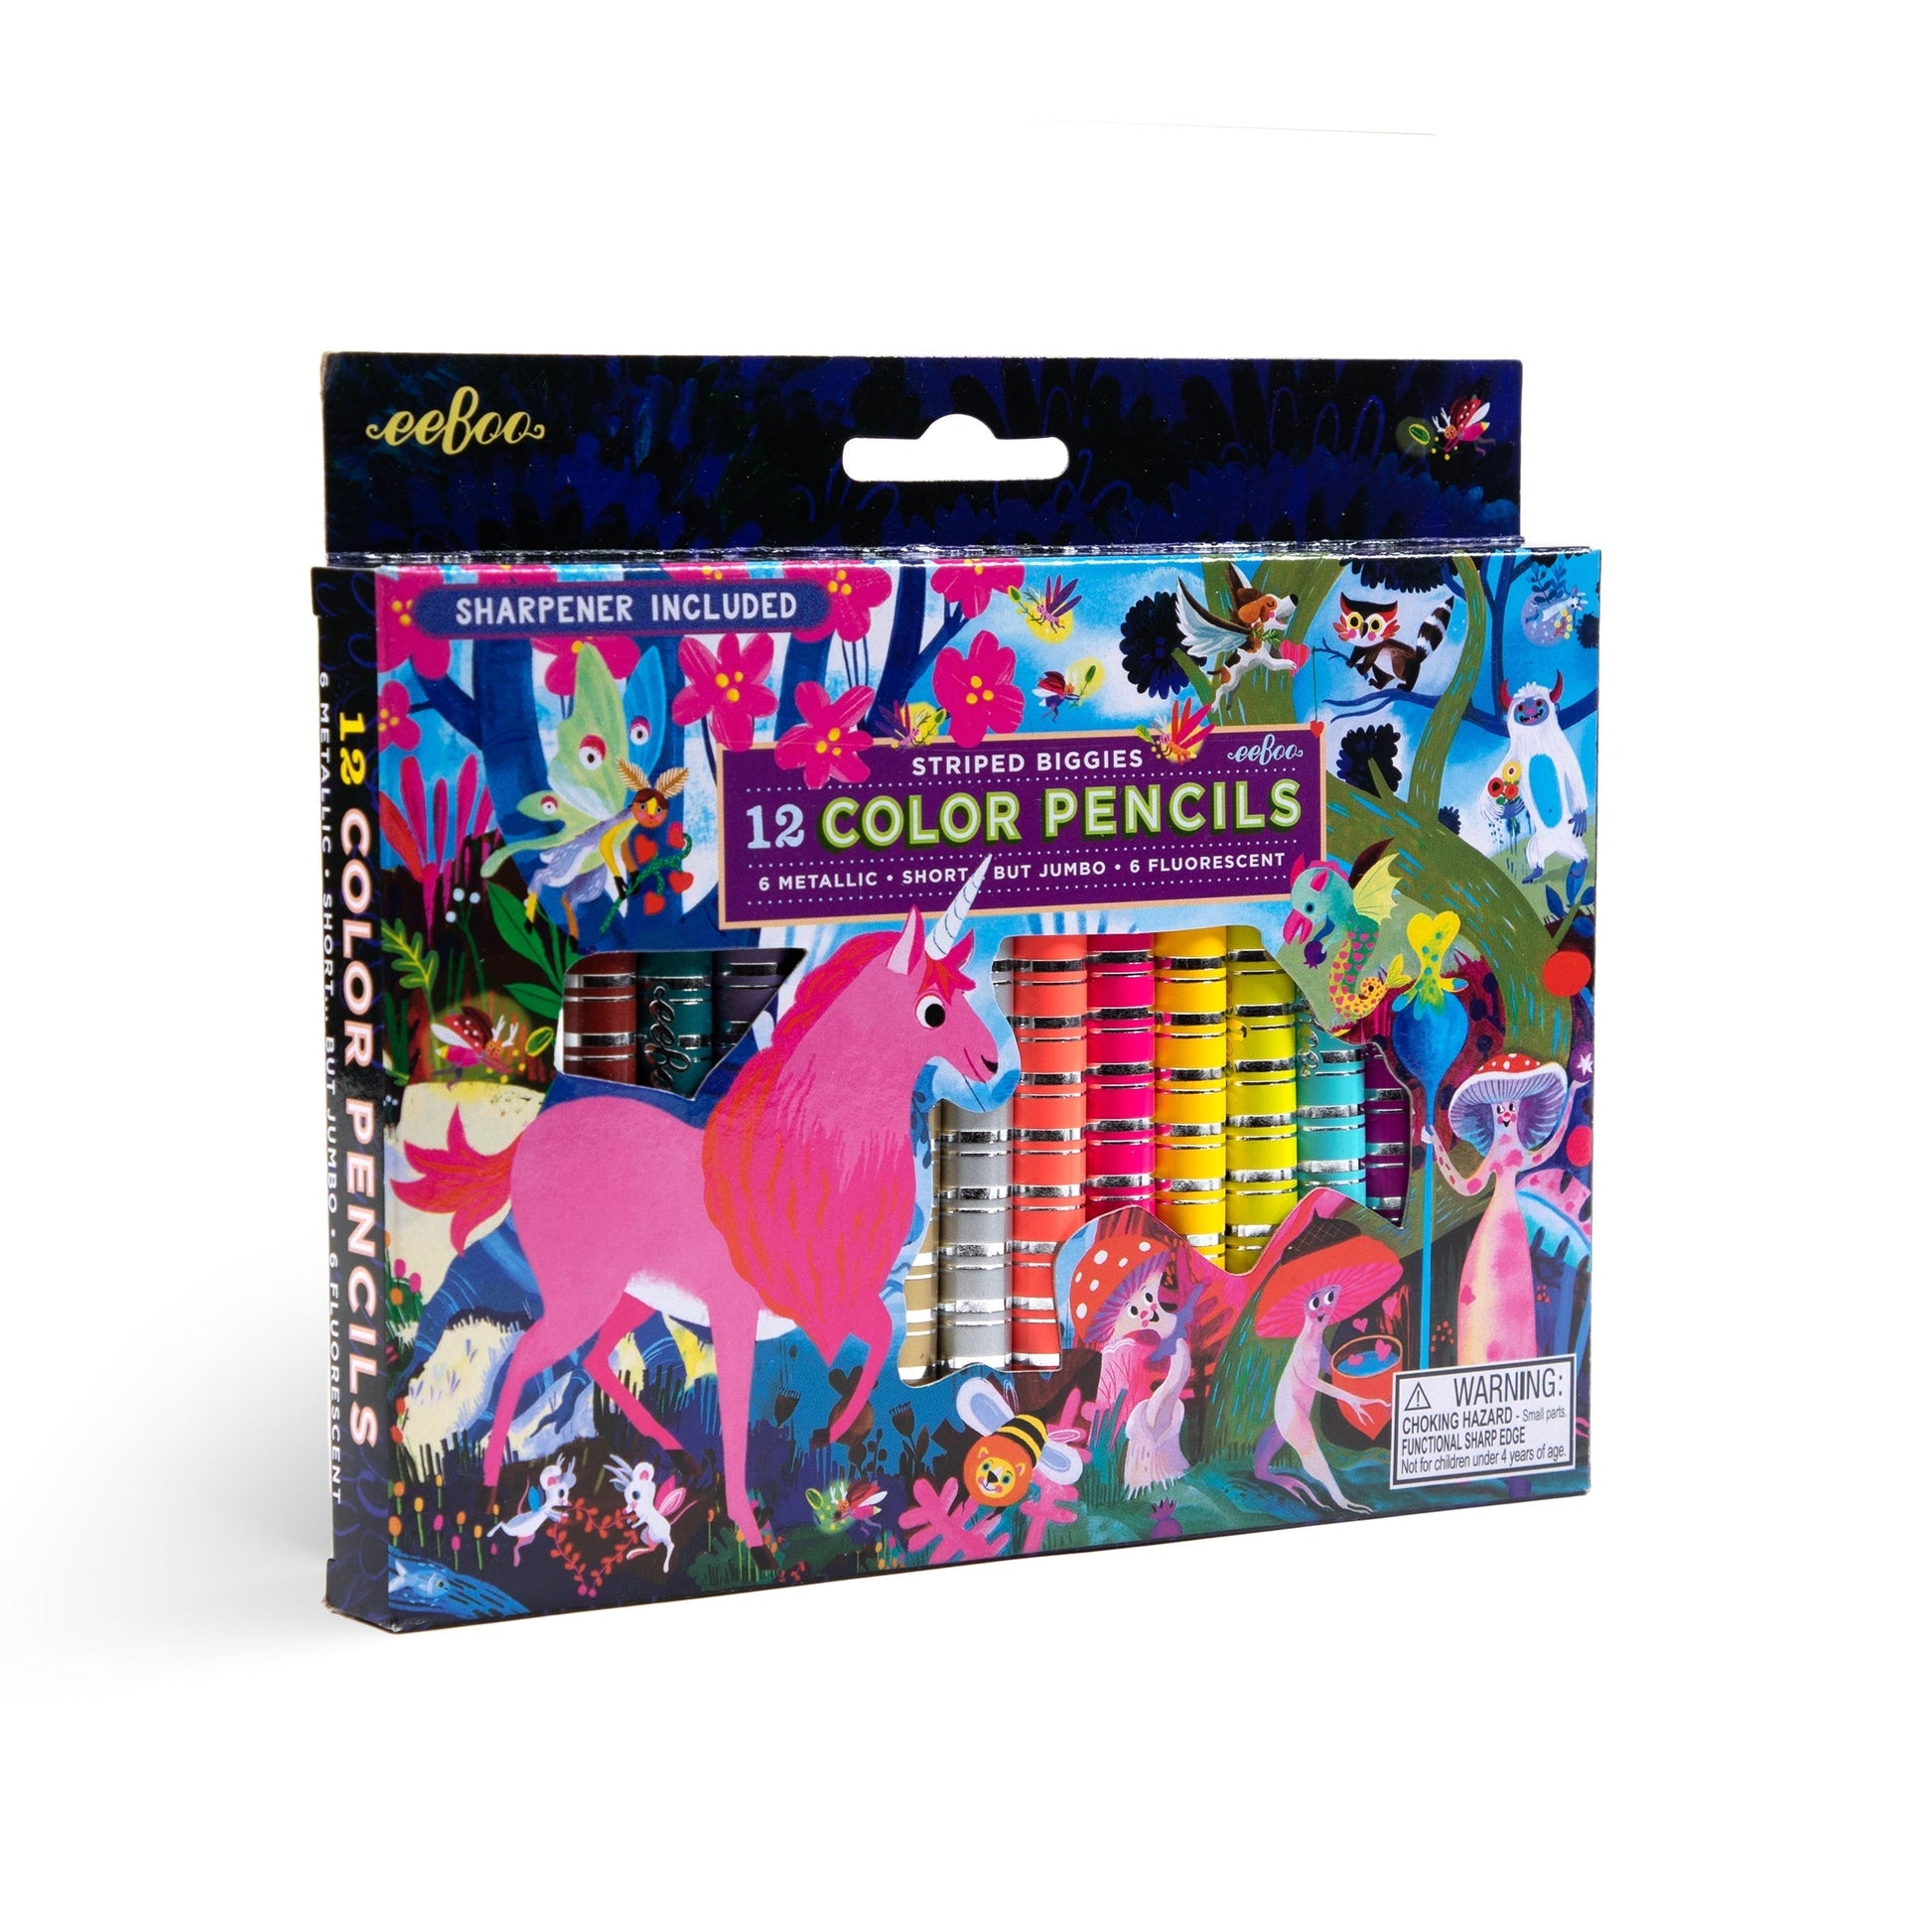 Magical Creatures 12 Color Pencils | Unique Great Gifts for Kids & Adults 